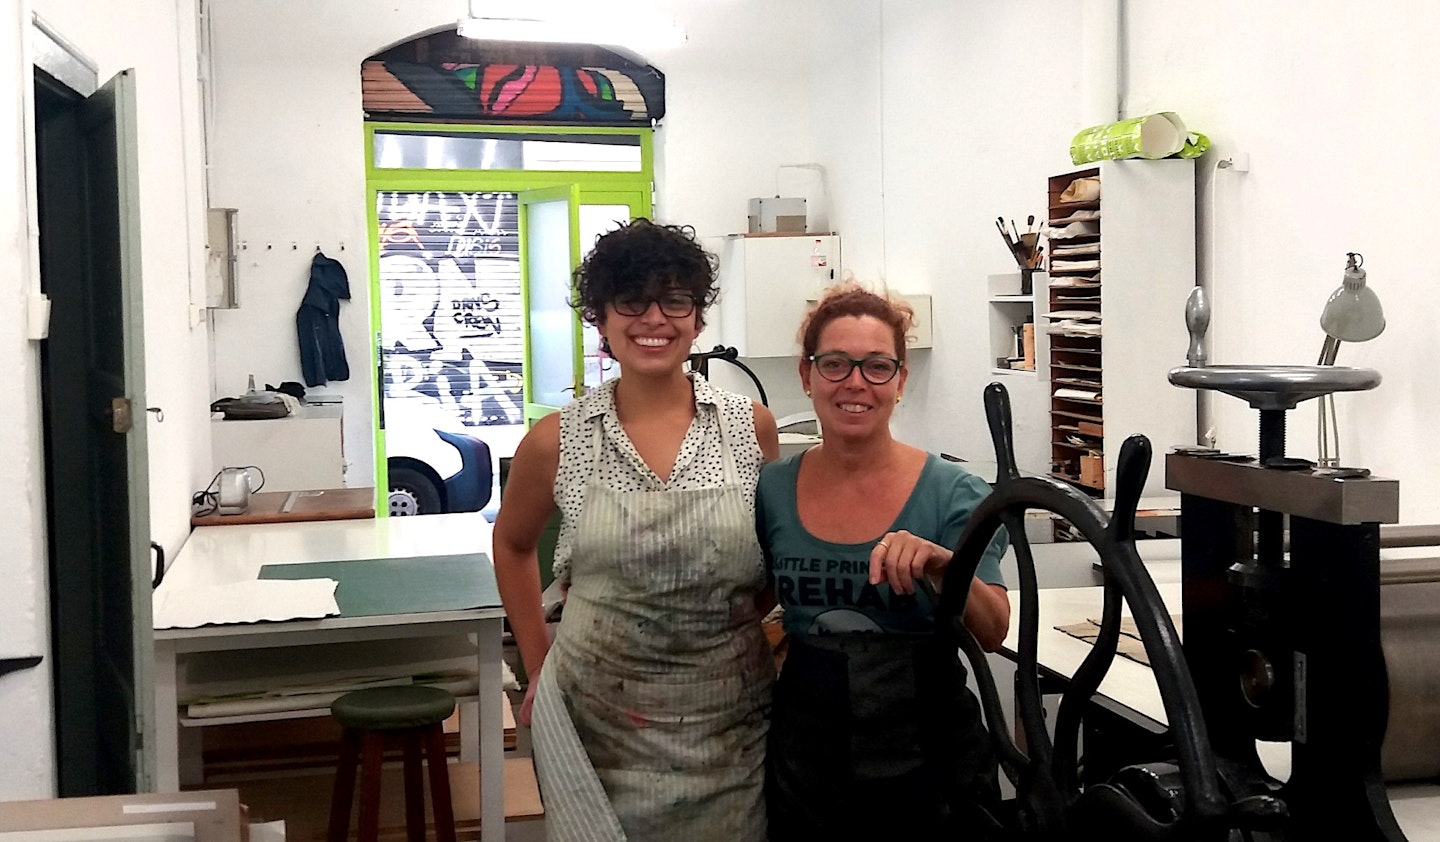 "Interview with Jannelle, a NYC artist, about printmaking & traveling to Europe | Read the full story on the VAWAA blog  #vawaa #art #artist #printmaking #barcelona #europe #travel "